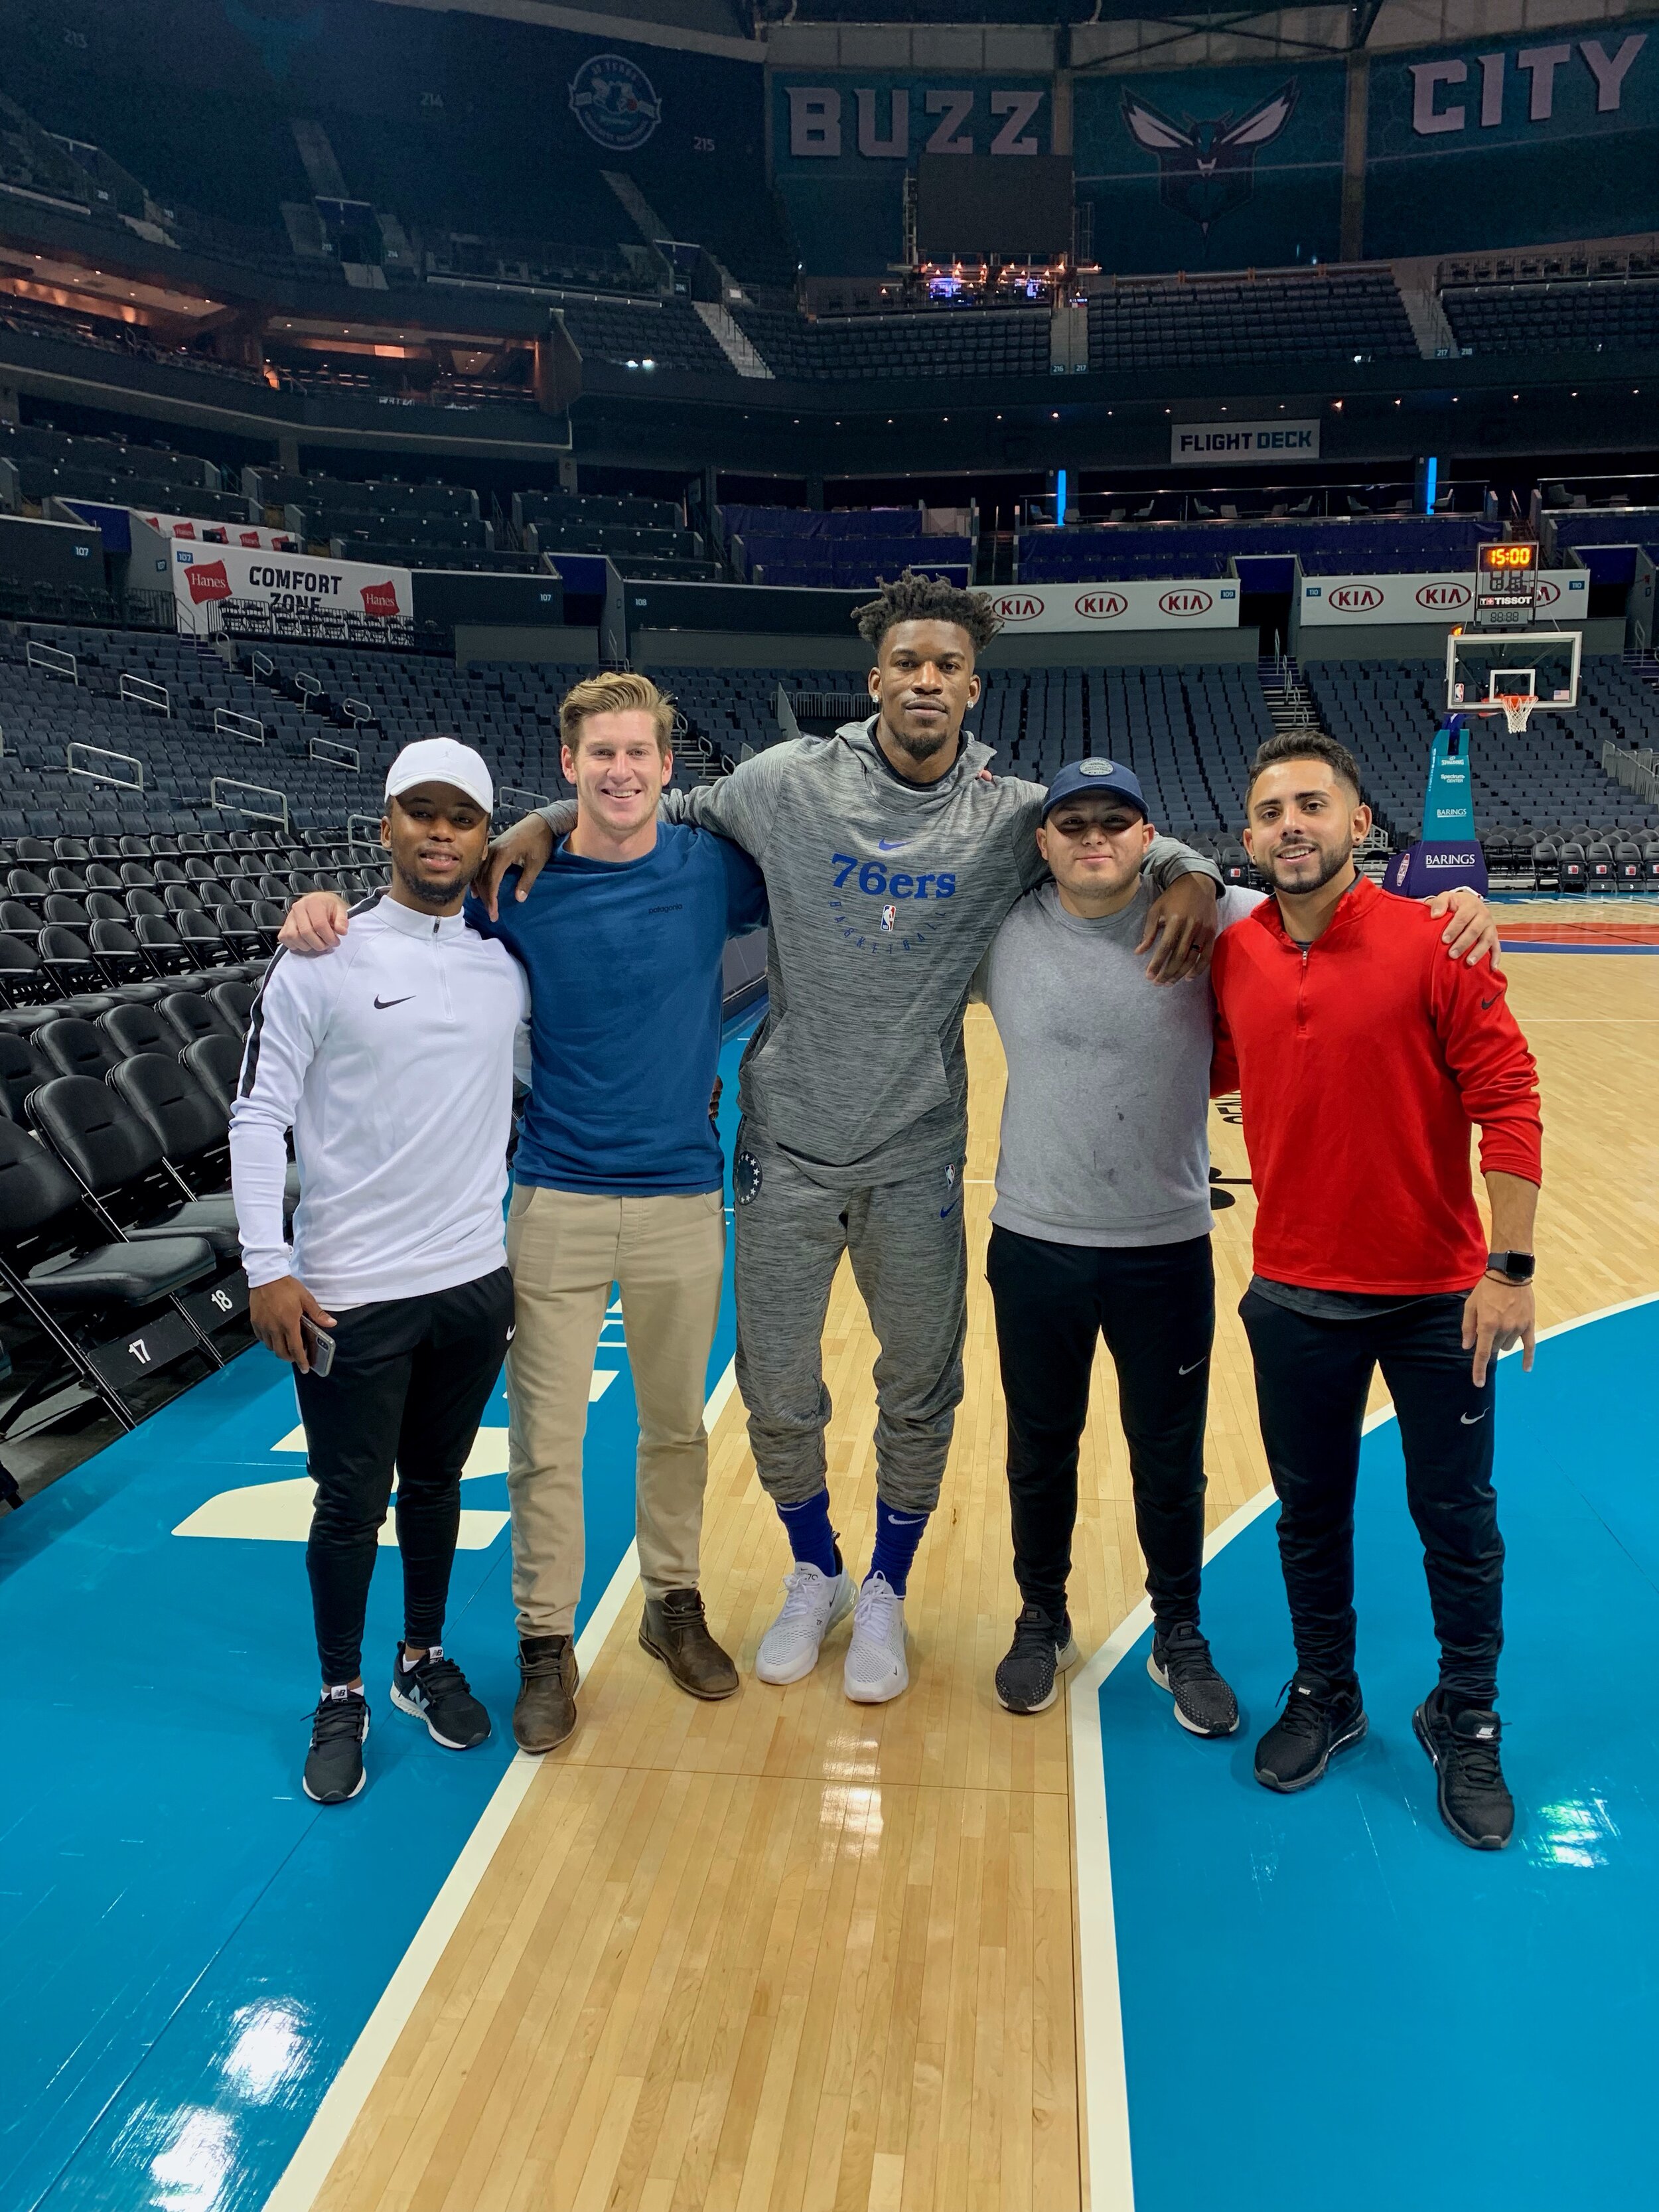 Butler with Segovia and his friends before playing the Charlotte Hornets at the Spectrum Center. (Photo courtesy of Jagger Segovia)